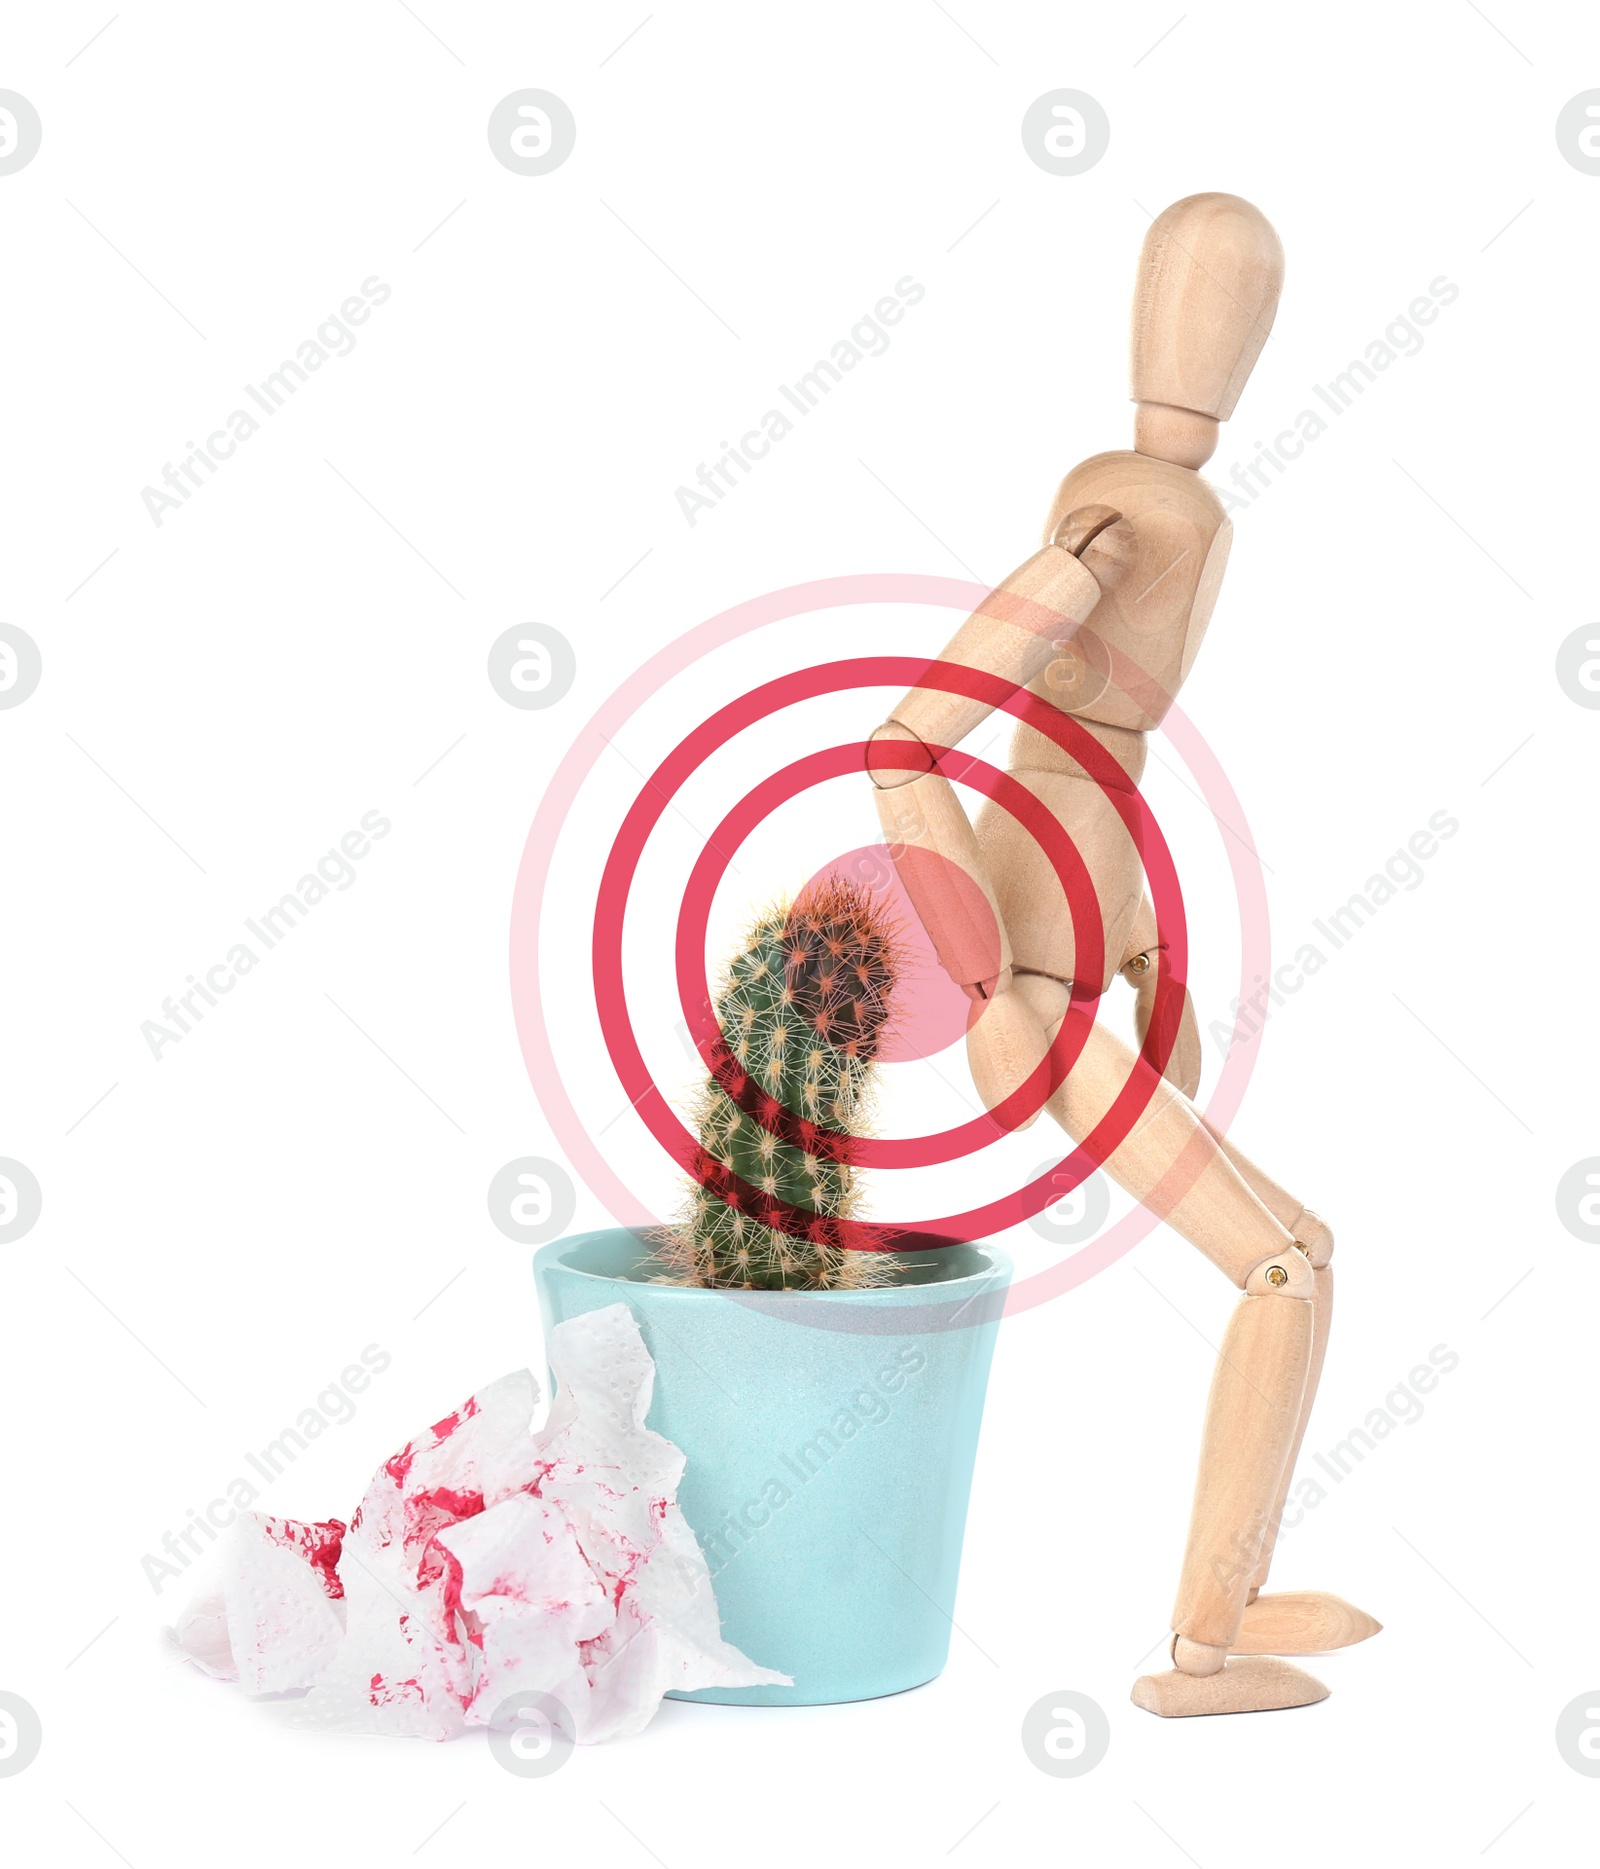 Image of Hemorrhoid concept. Wooden human figure, cactus and sheets of toilet paper with blood on white background